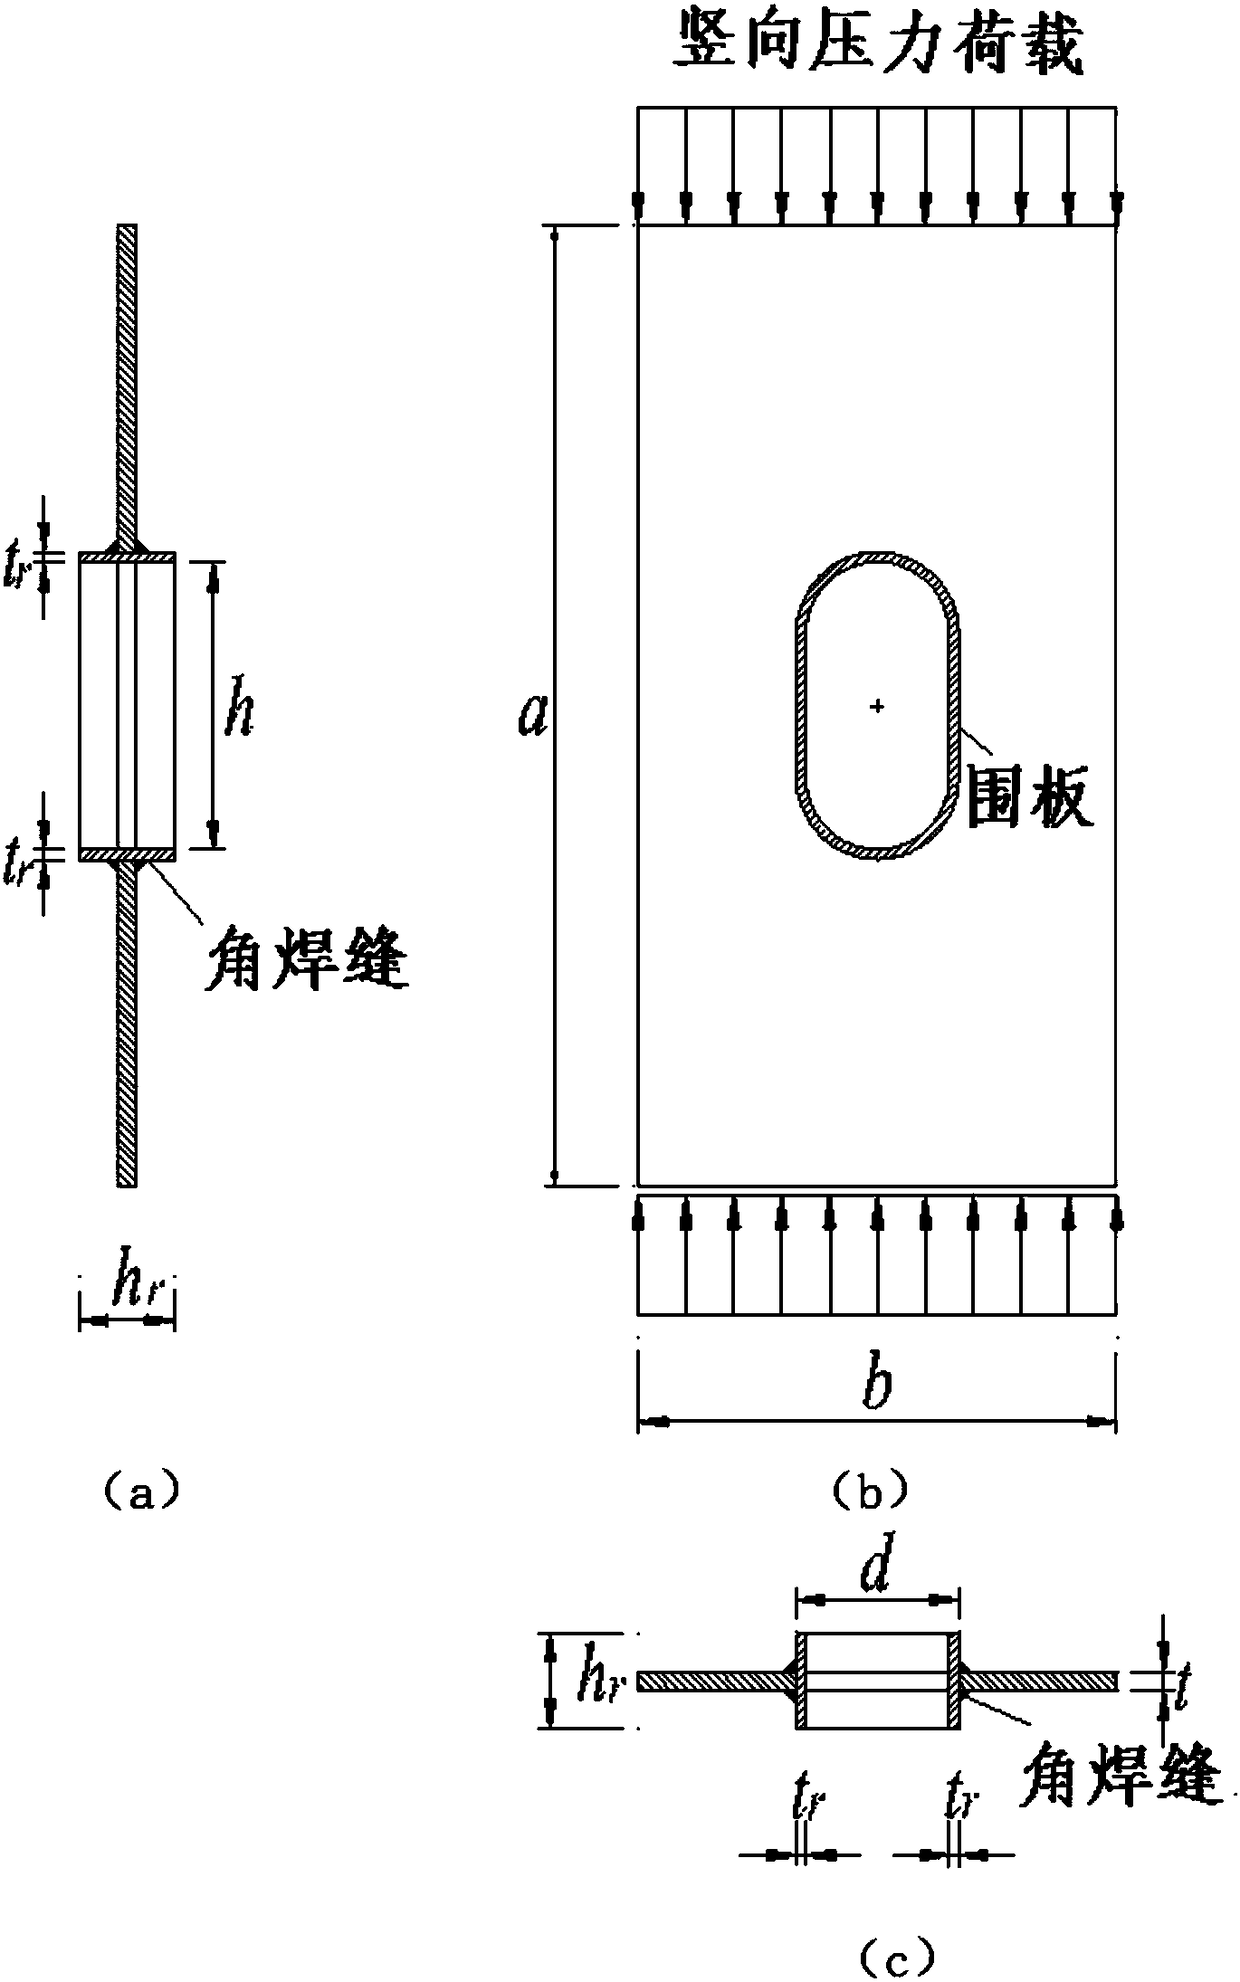 Reinforcement method of coaming plate for oblong inspection hole of steel box bridge tower